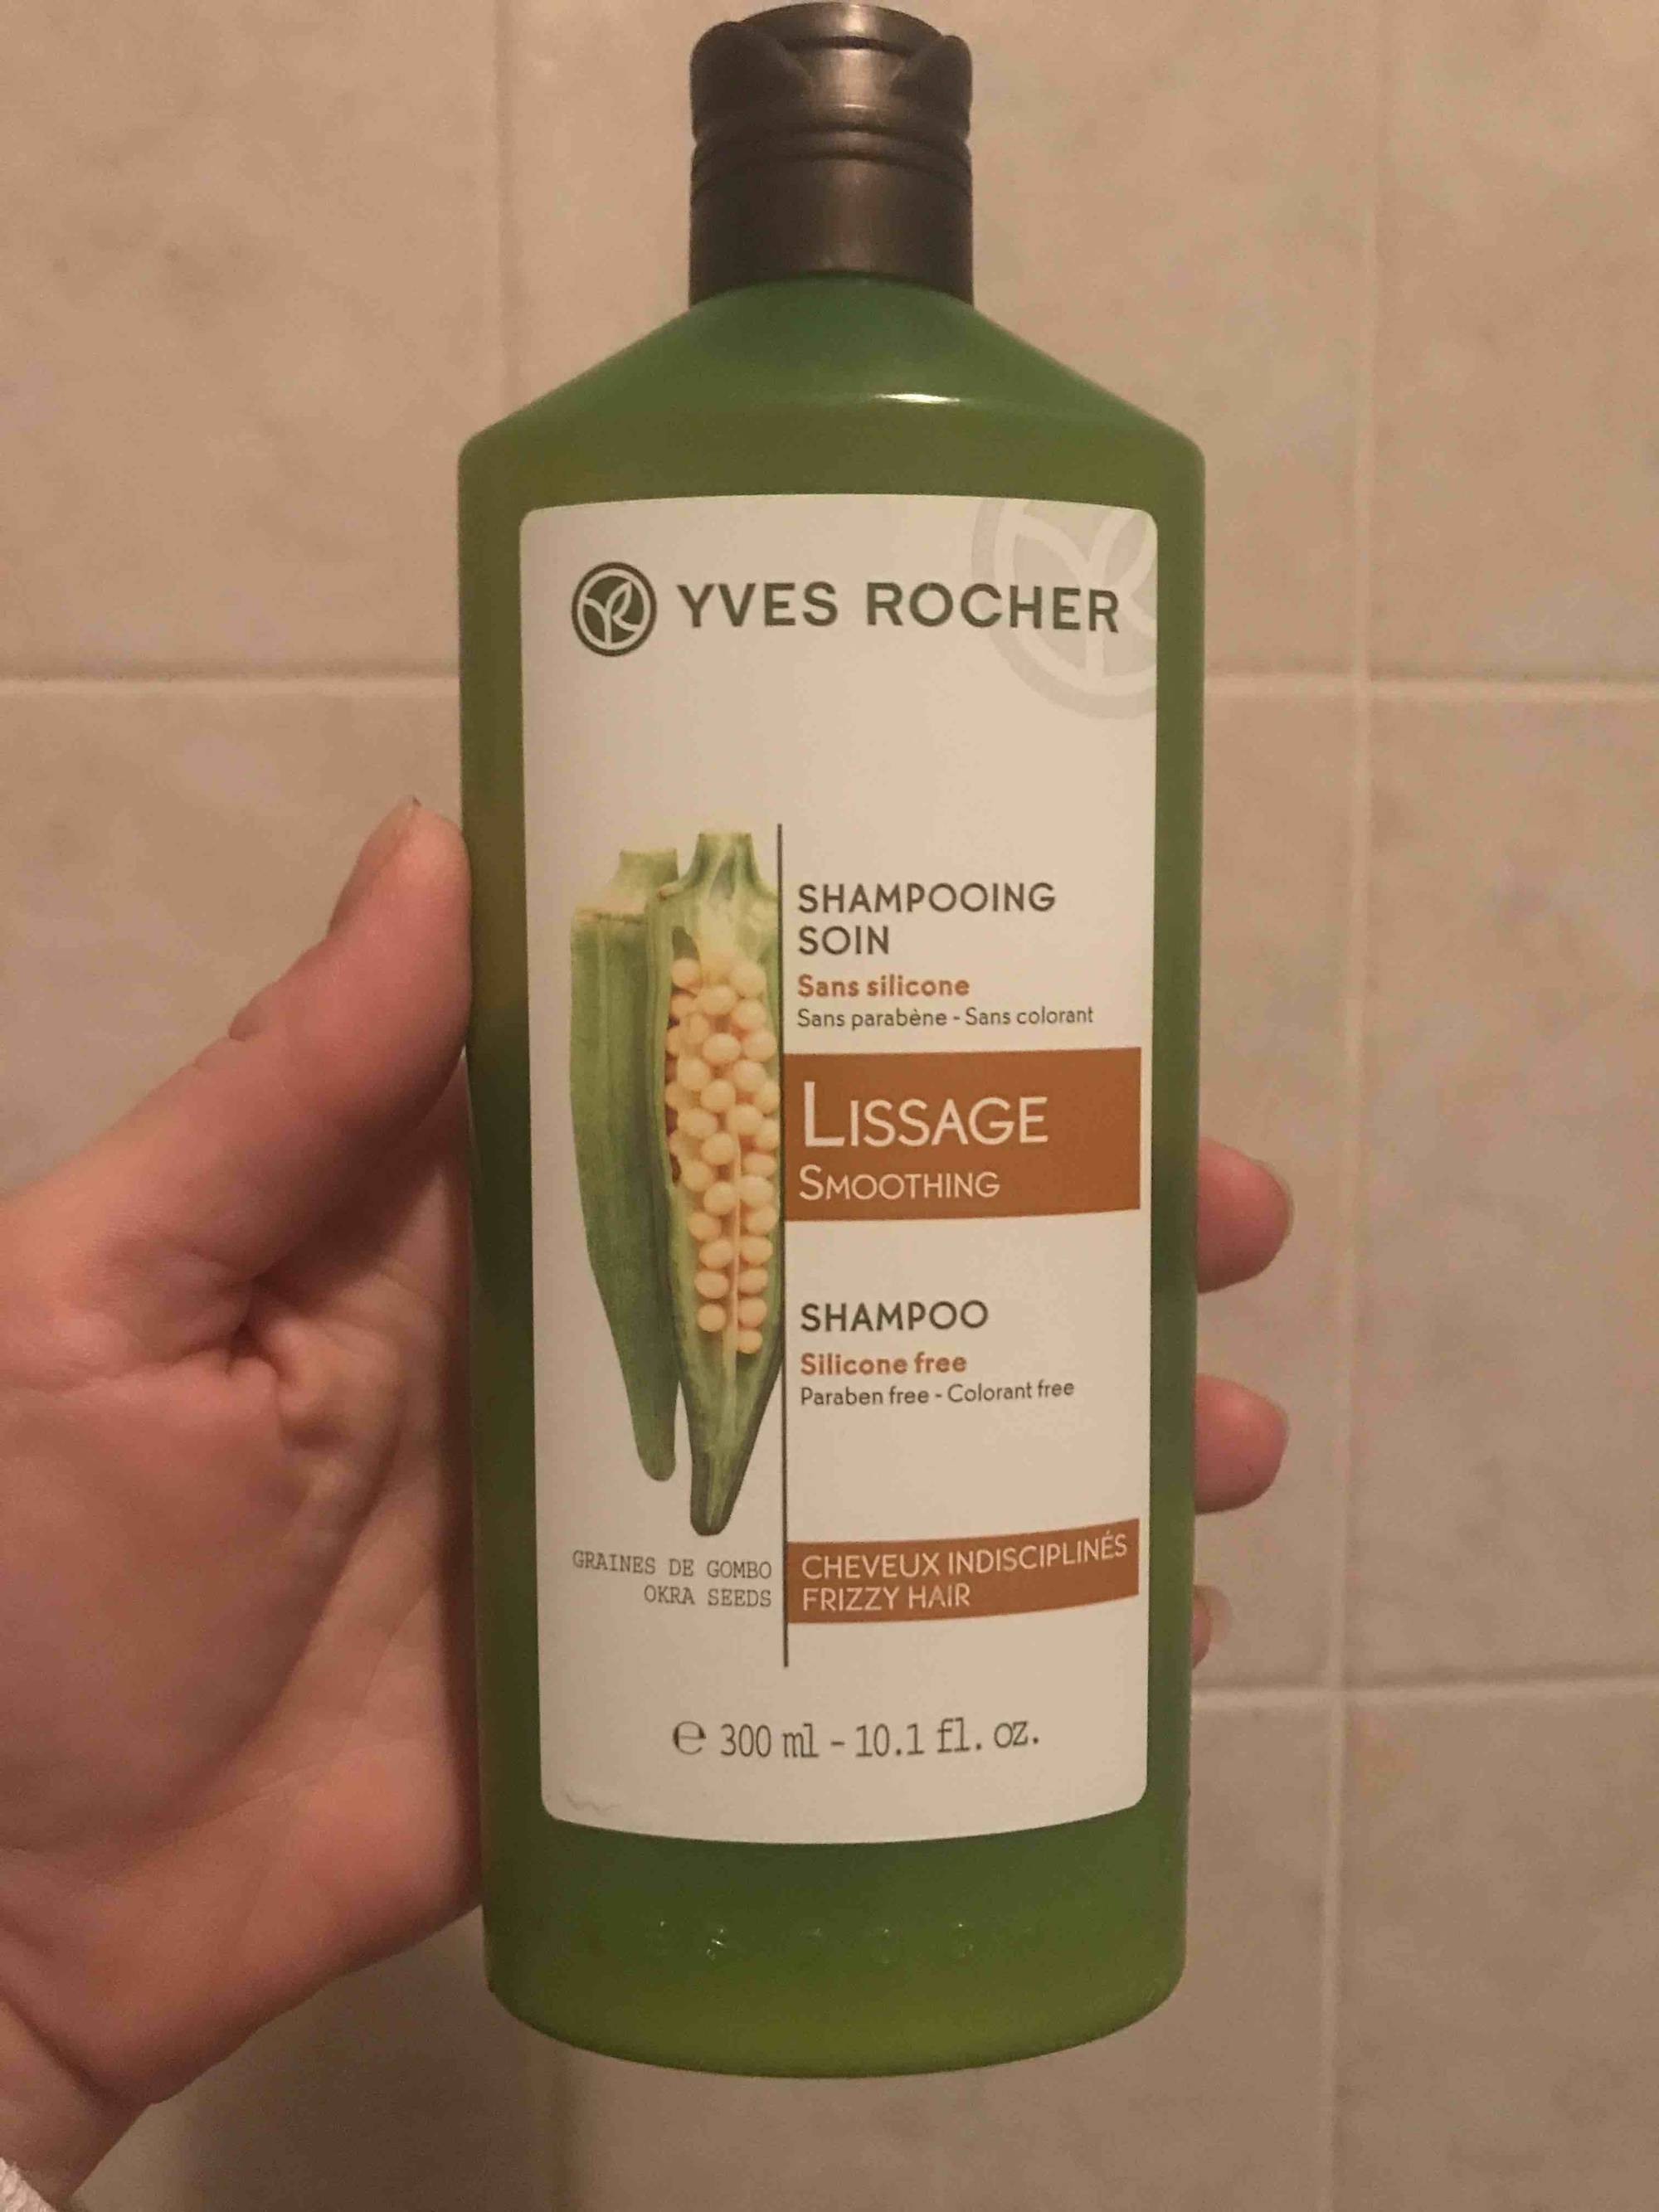 YVES ROCHER - Shampooing soin - Lissage smoothing